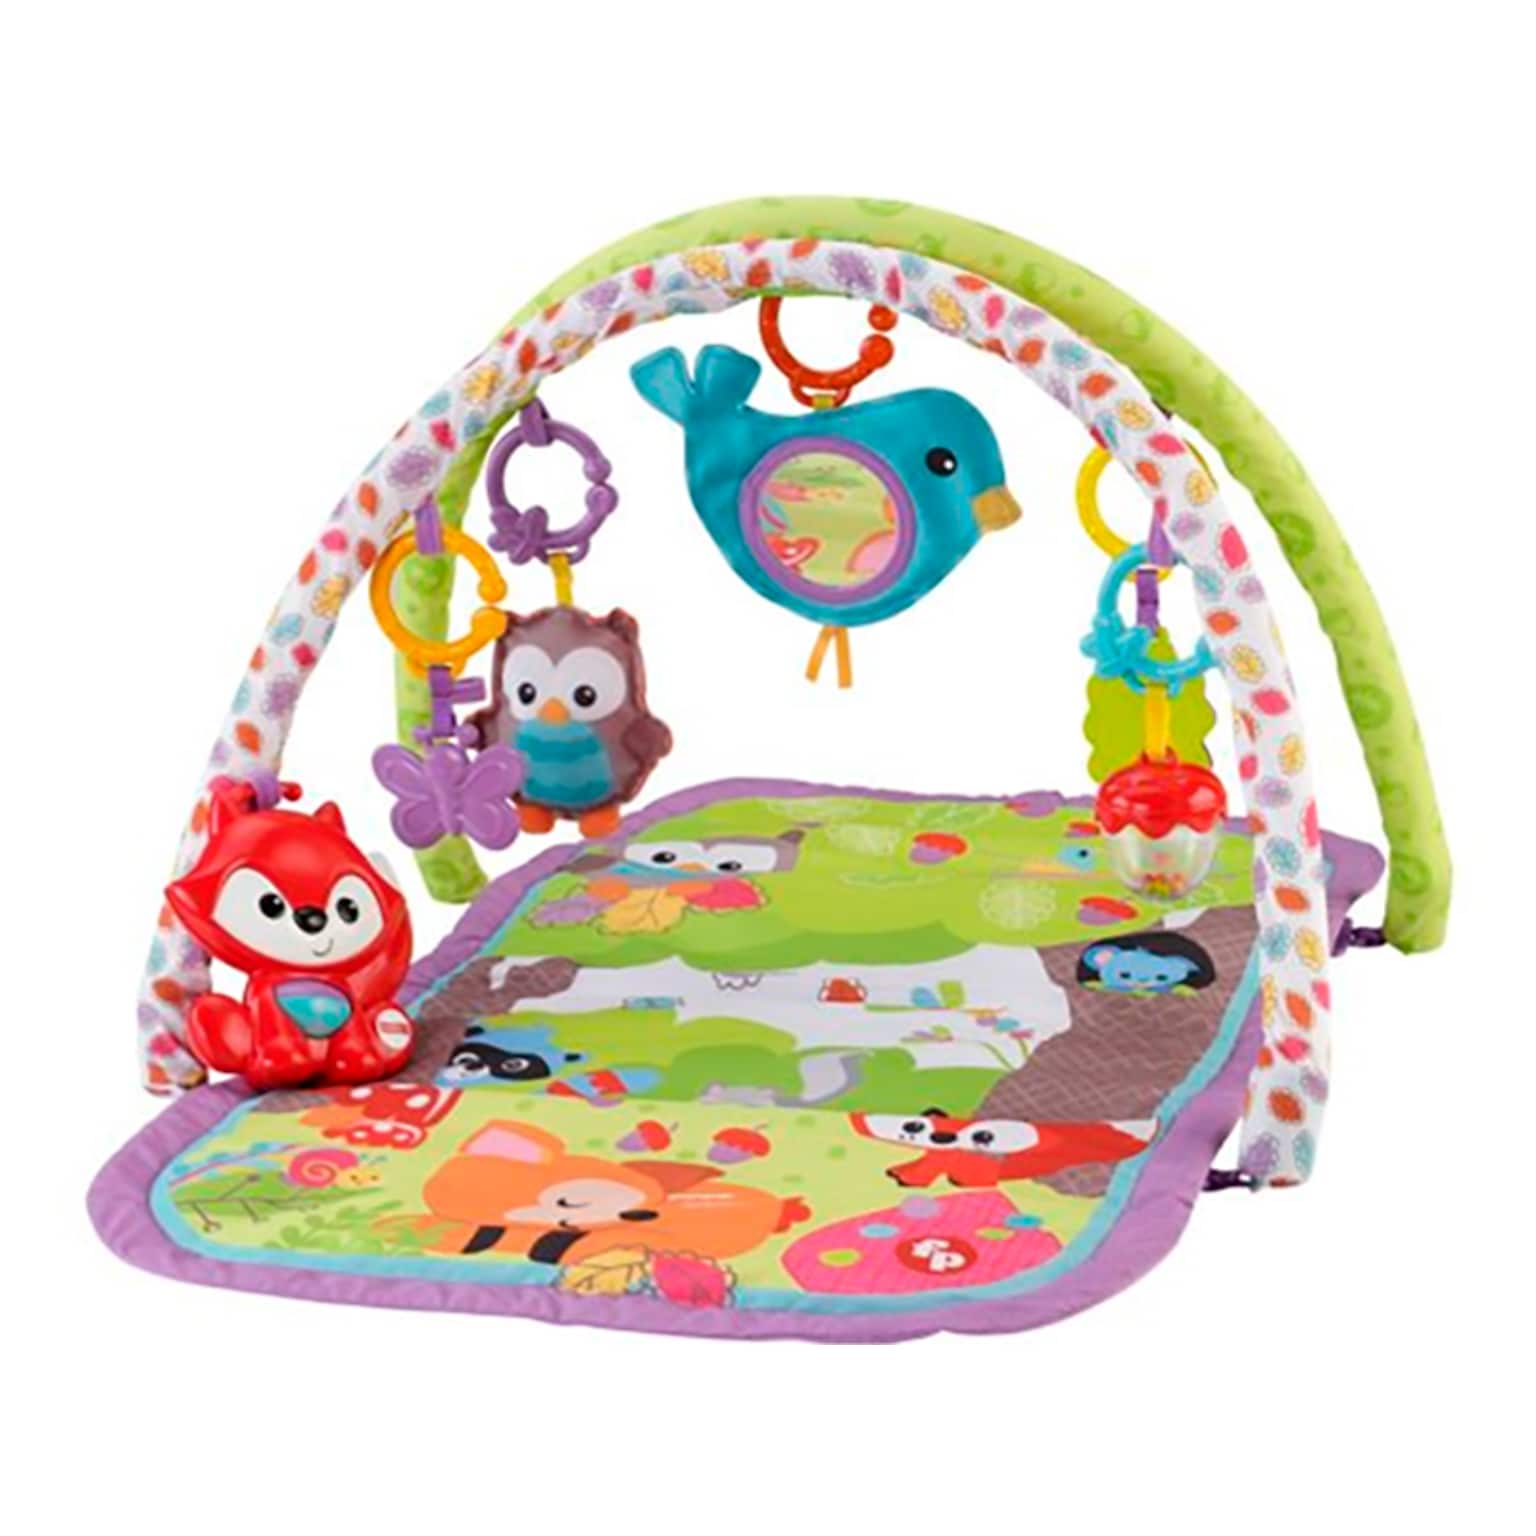 Fisher-Price 3-in-1 Musical Activity Gym, Multicolor (CDN47)